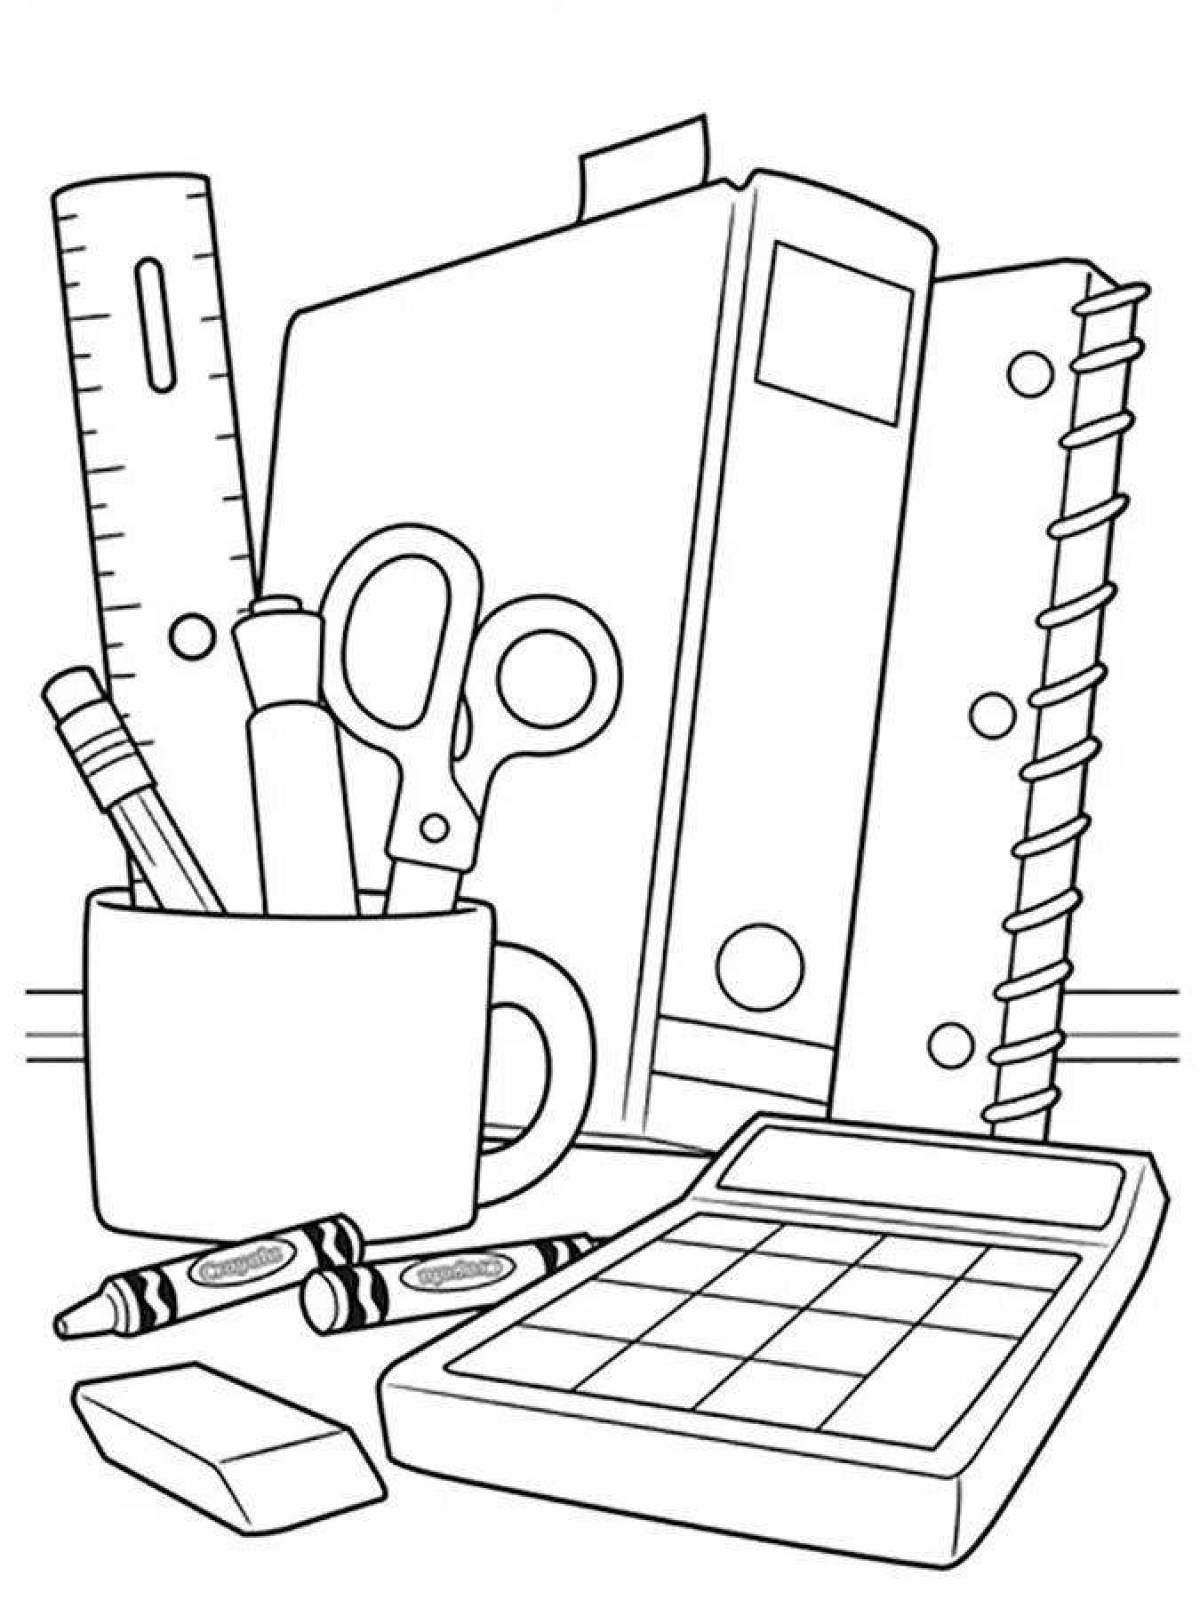 School items coloring page